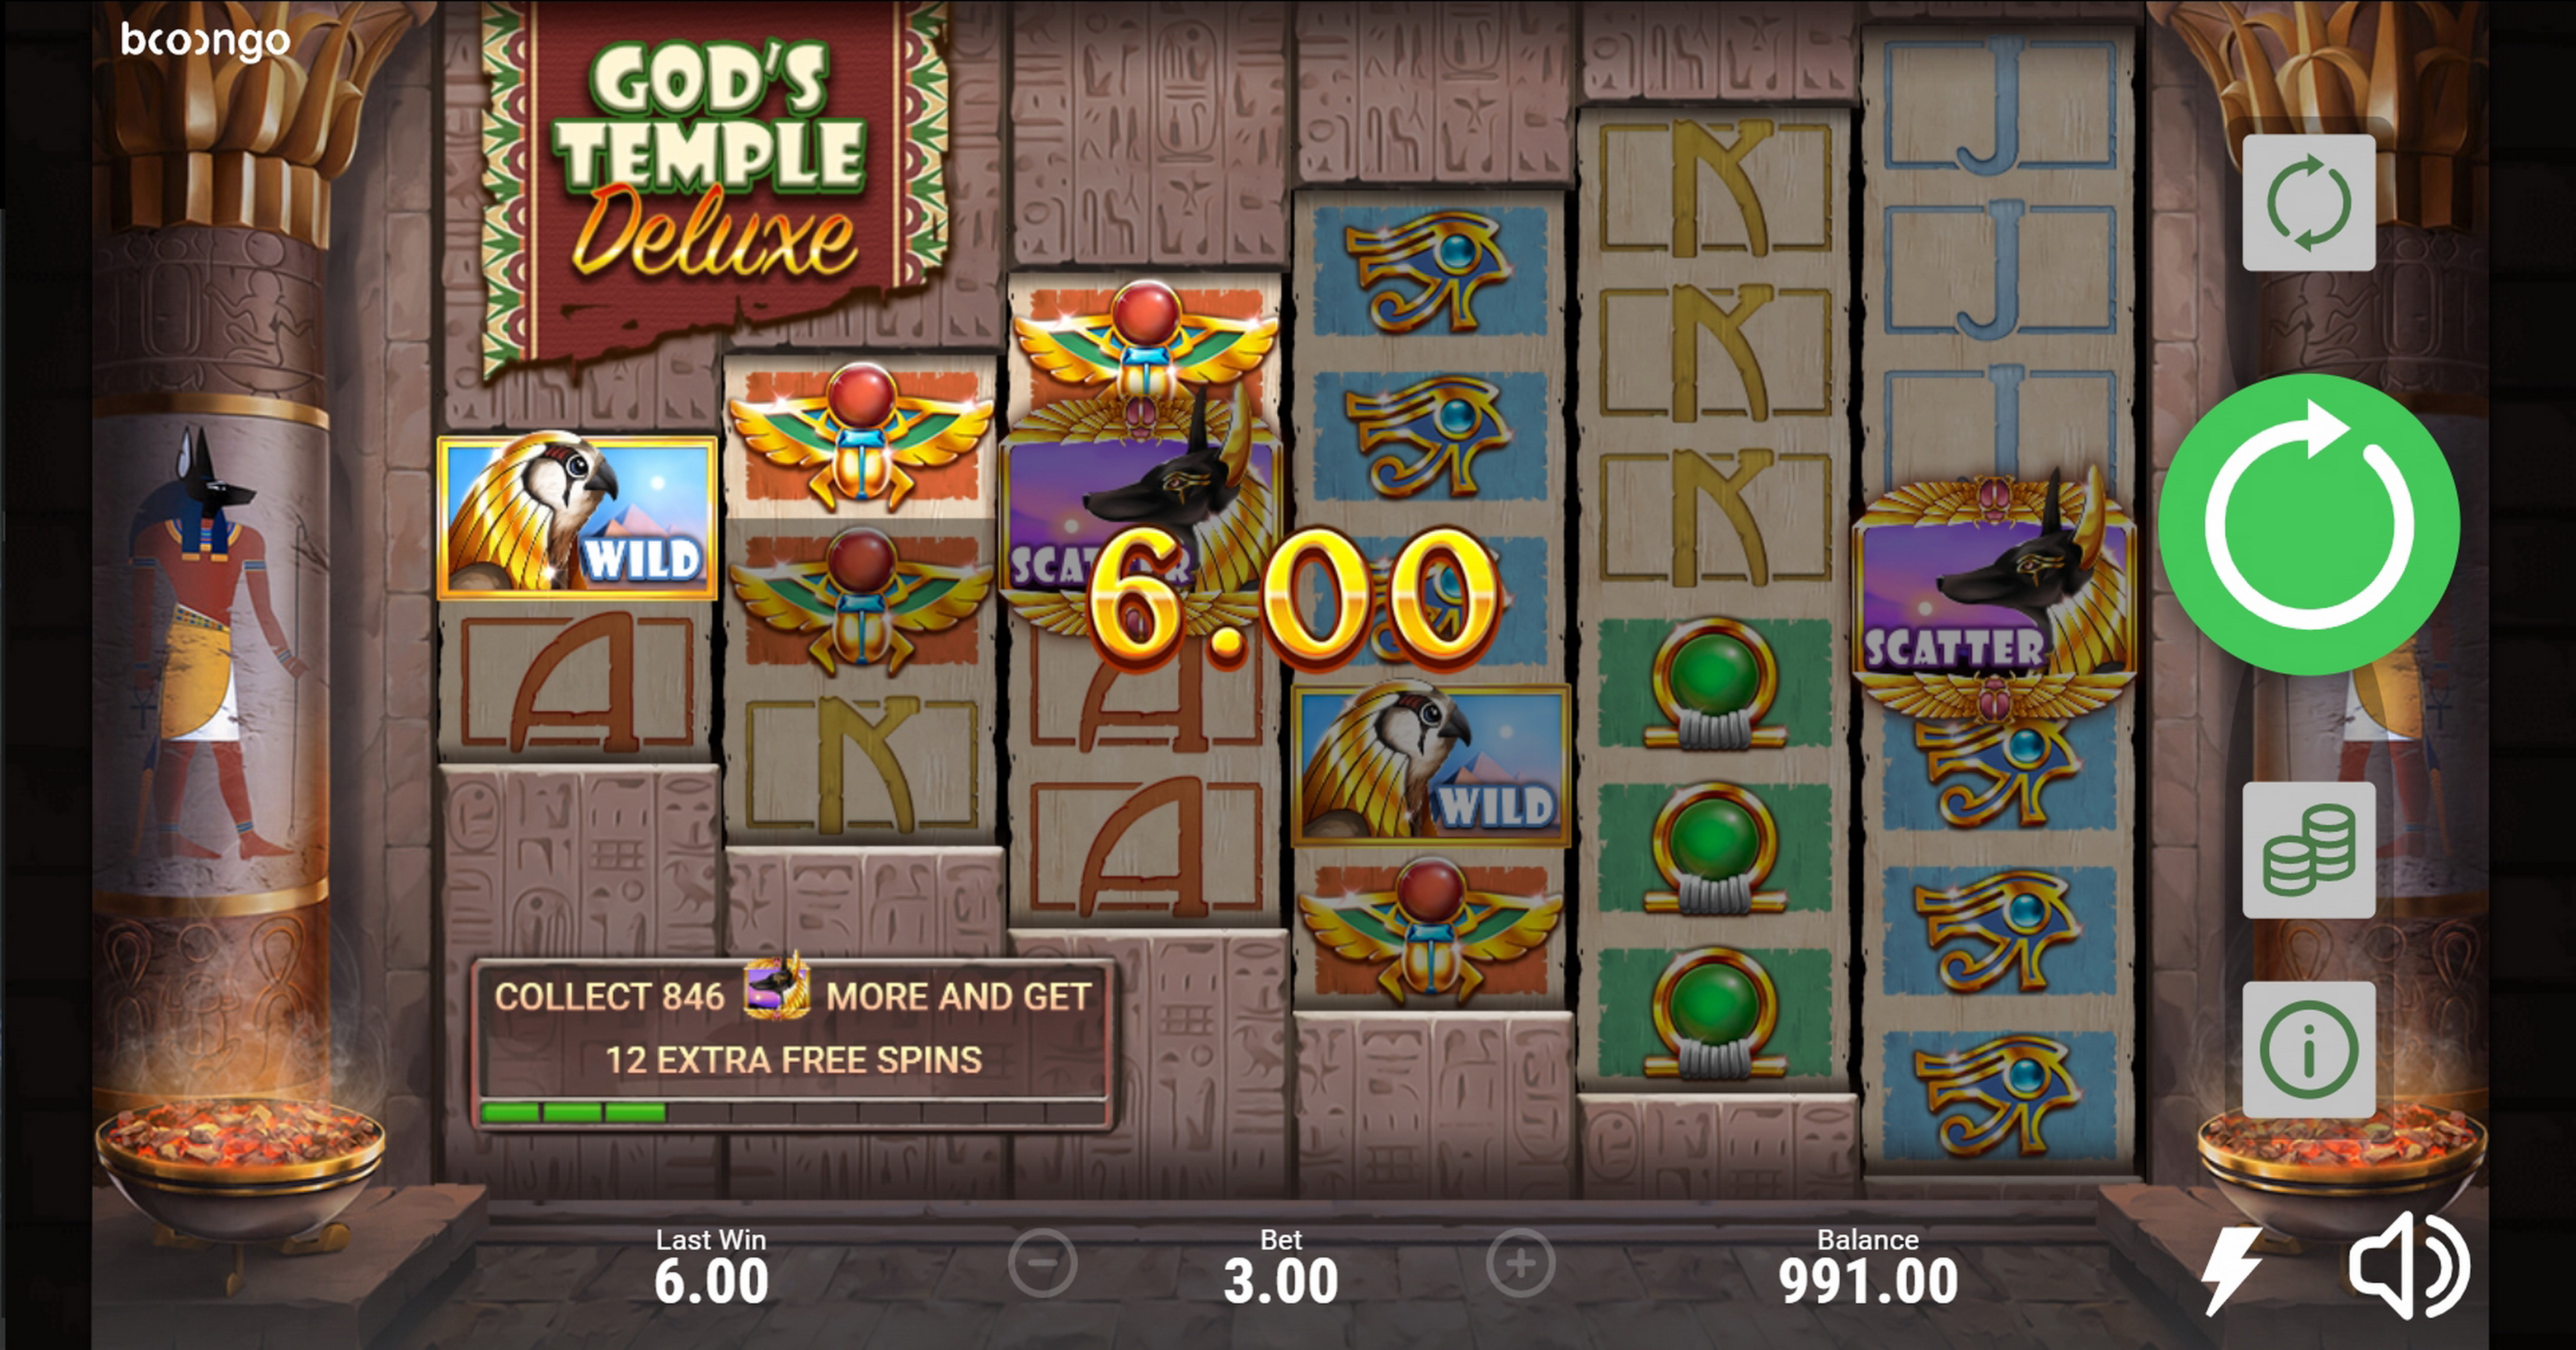 Win Money in God's Temple Deluxe Free Slot Game by Booongo Gaming